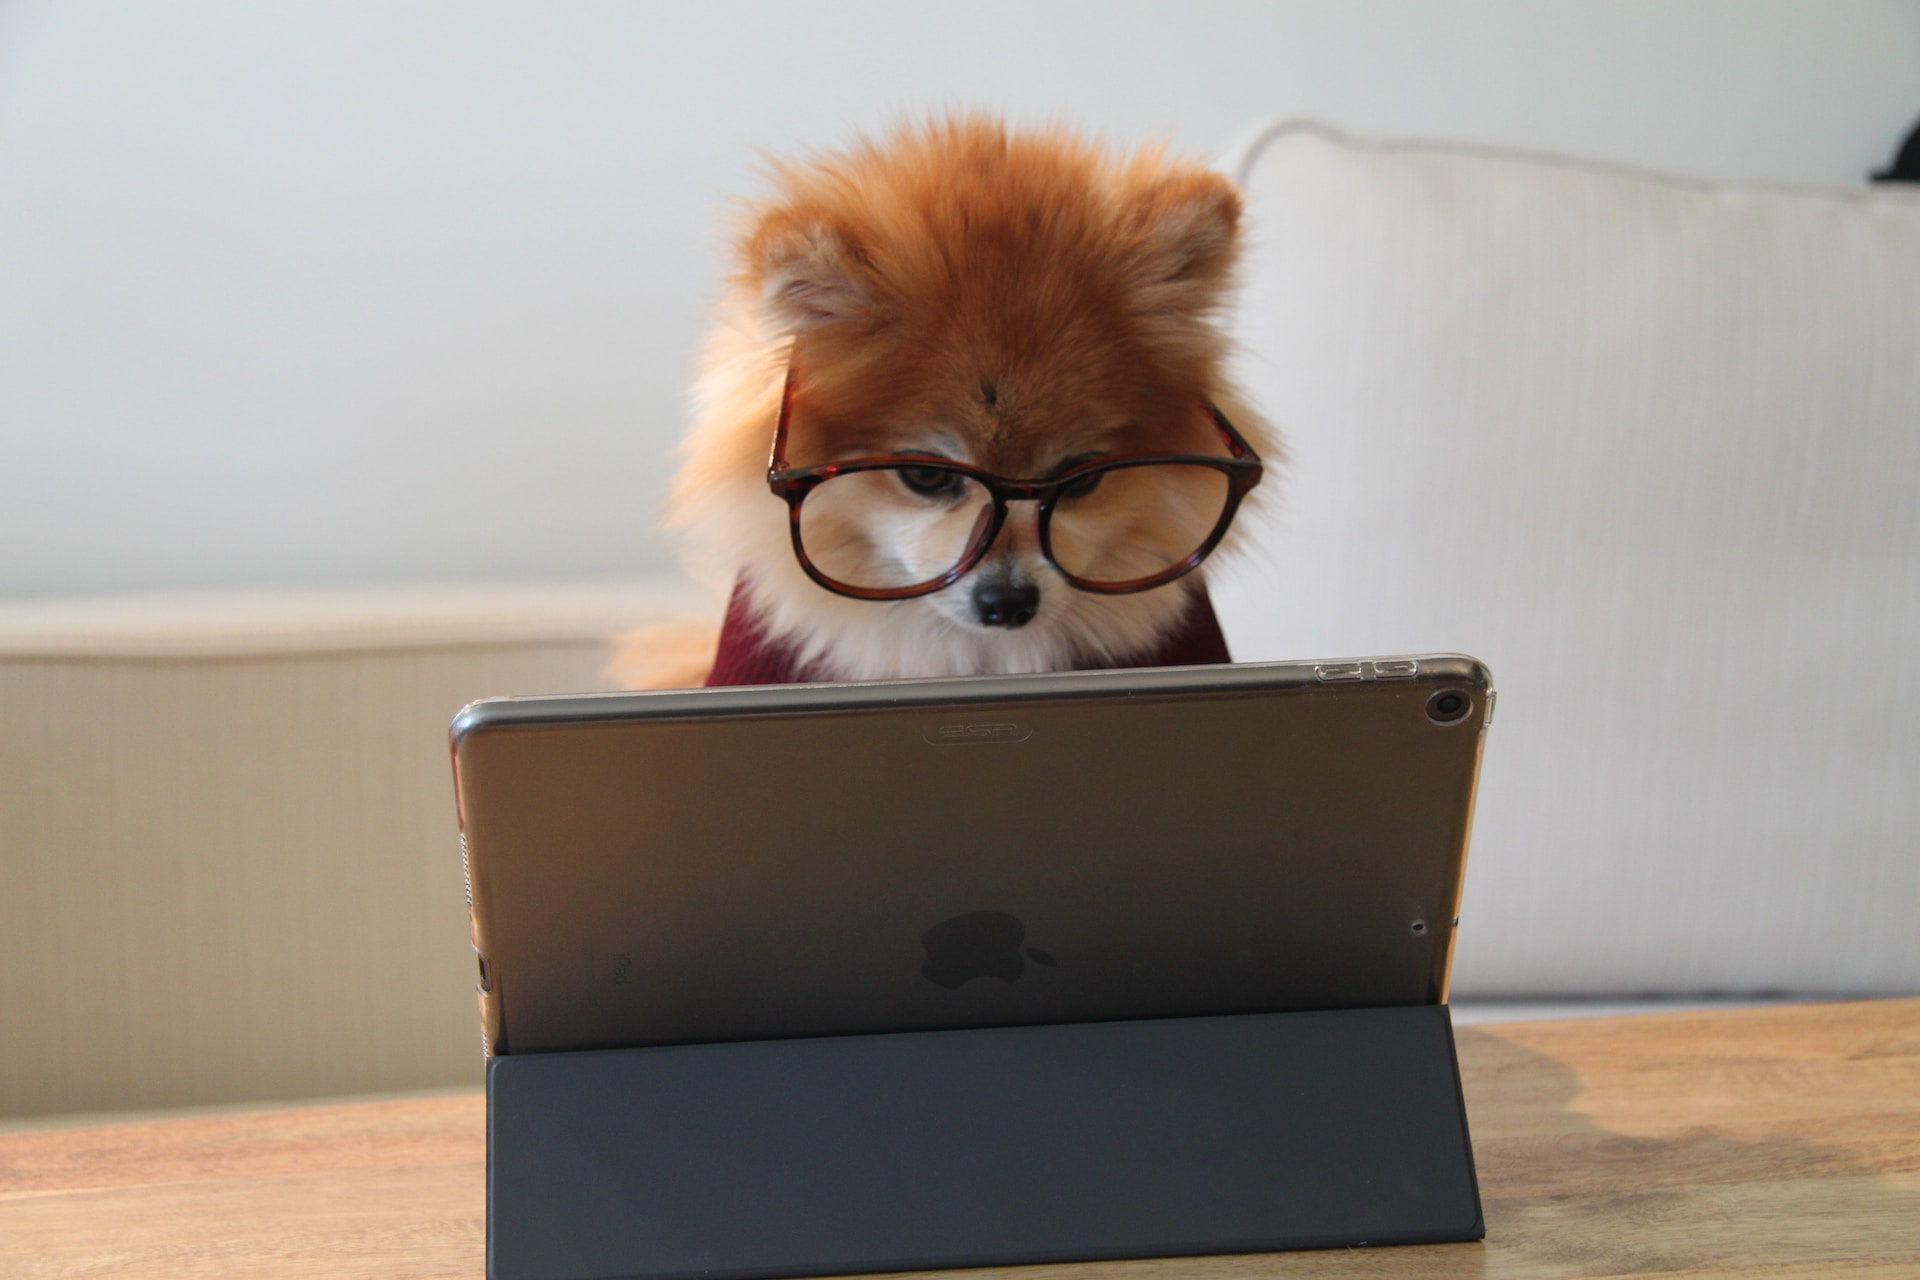 A dog wearing glasses looking at a shopify refund report